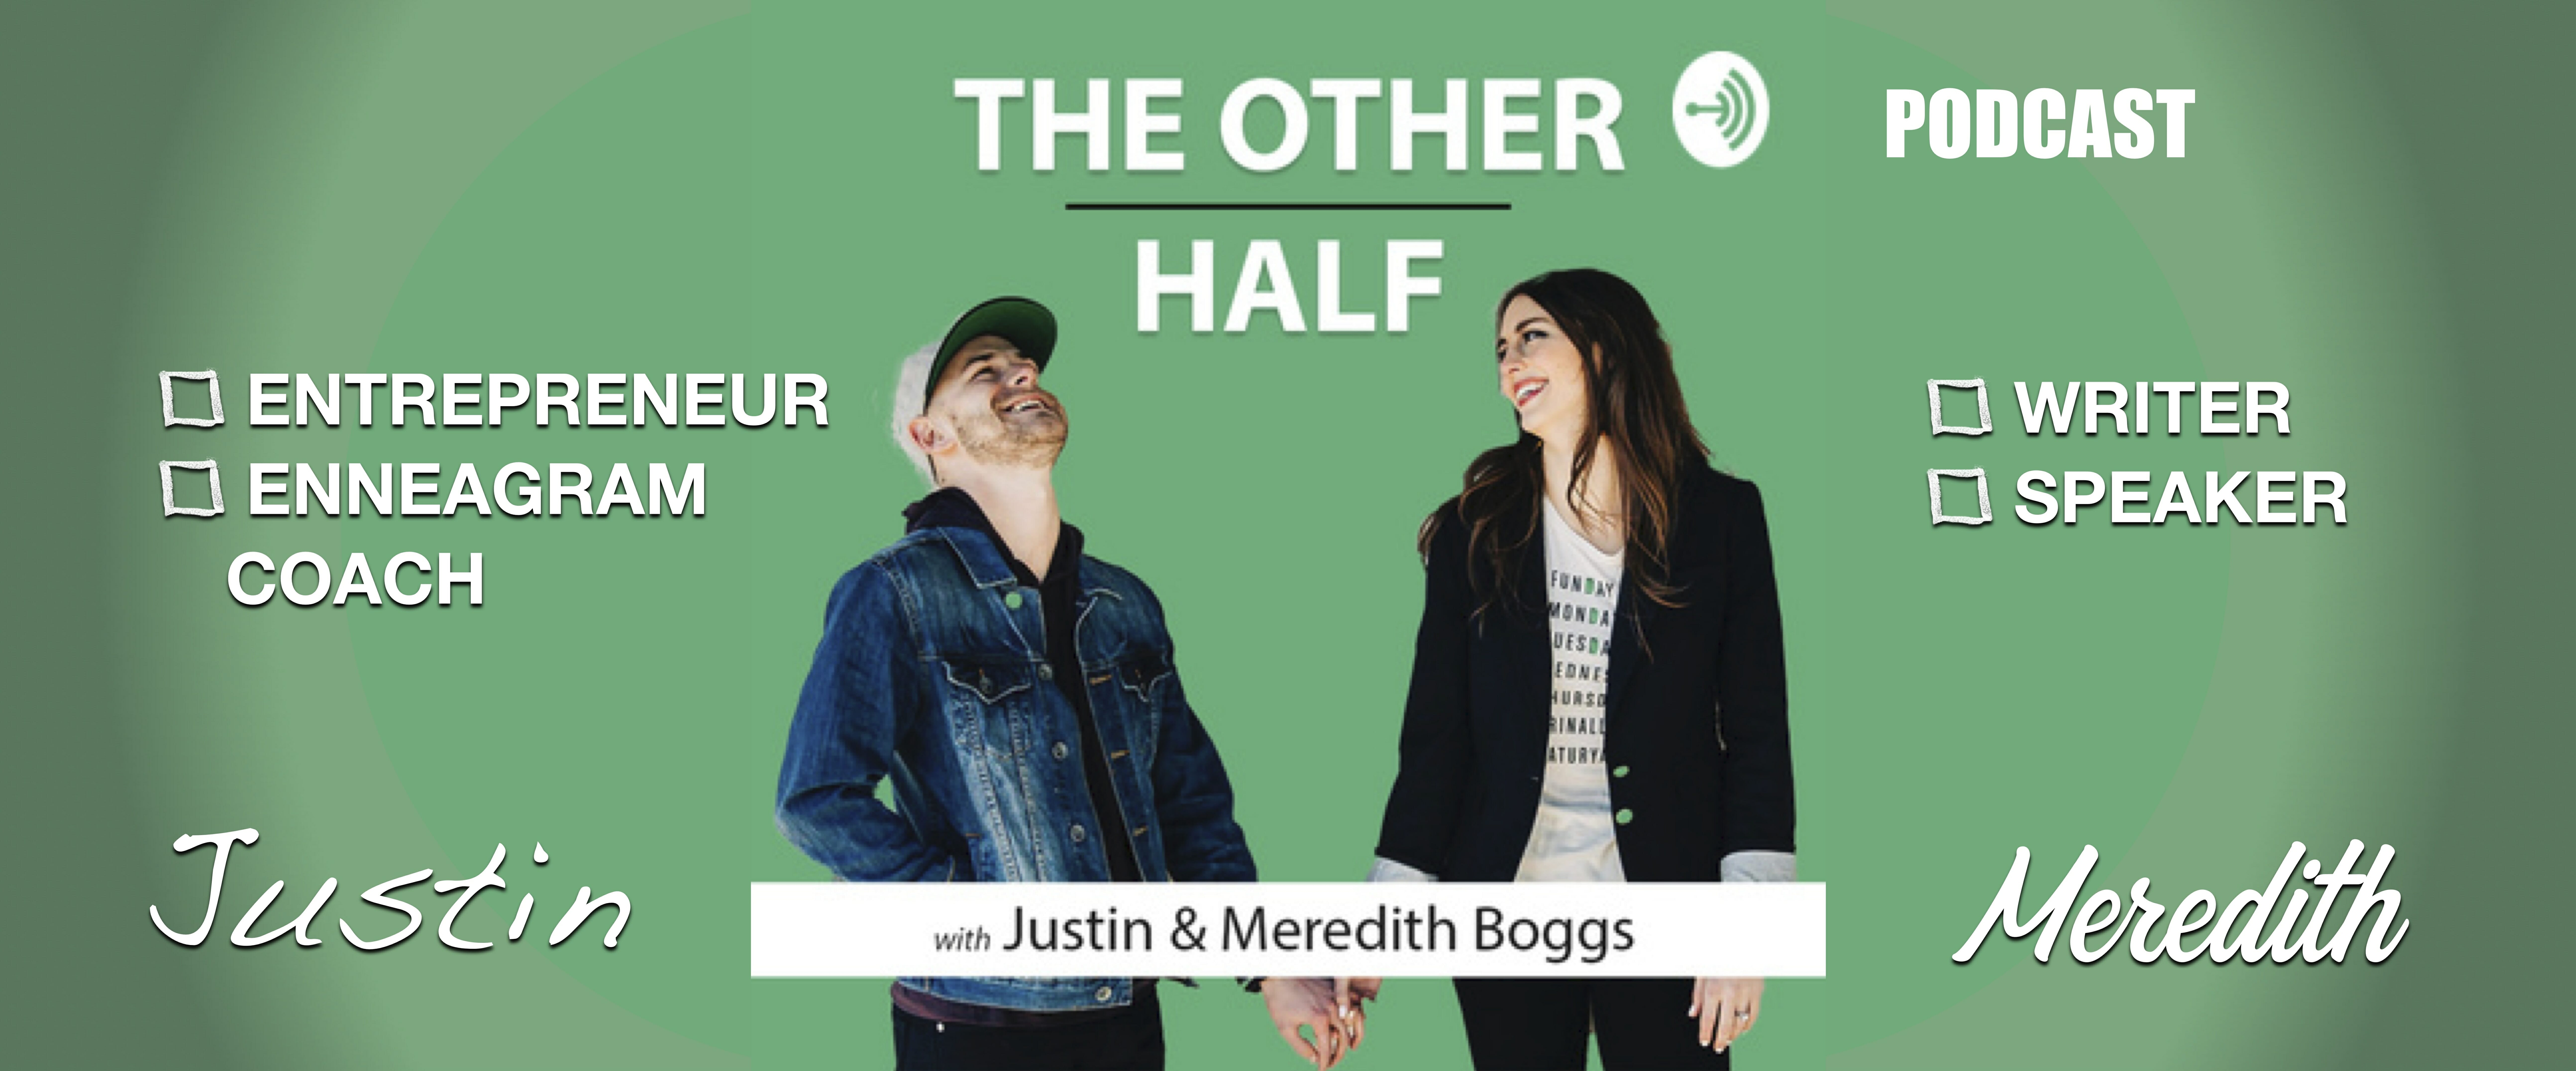 THE OTHER HALF PODCAST: The Other Half of Goals—When You Don